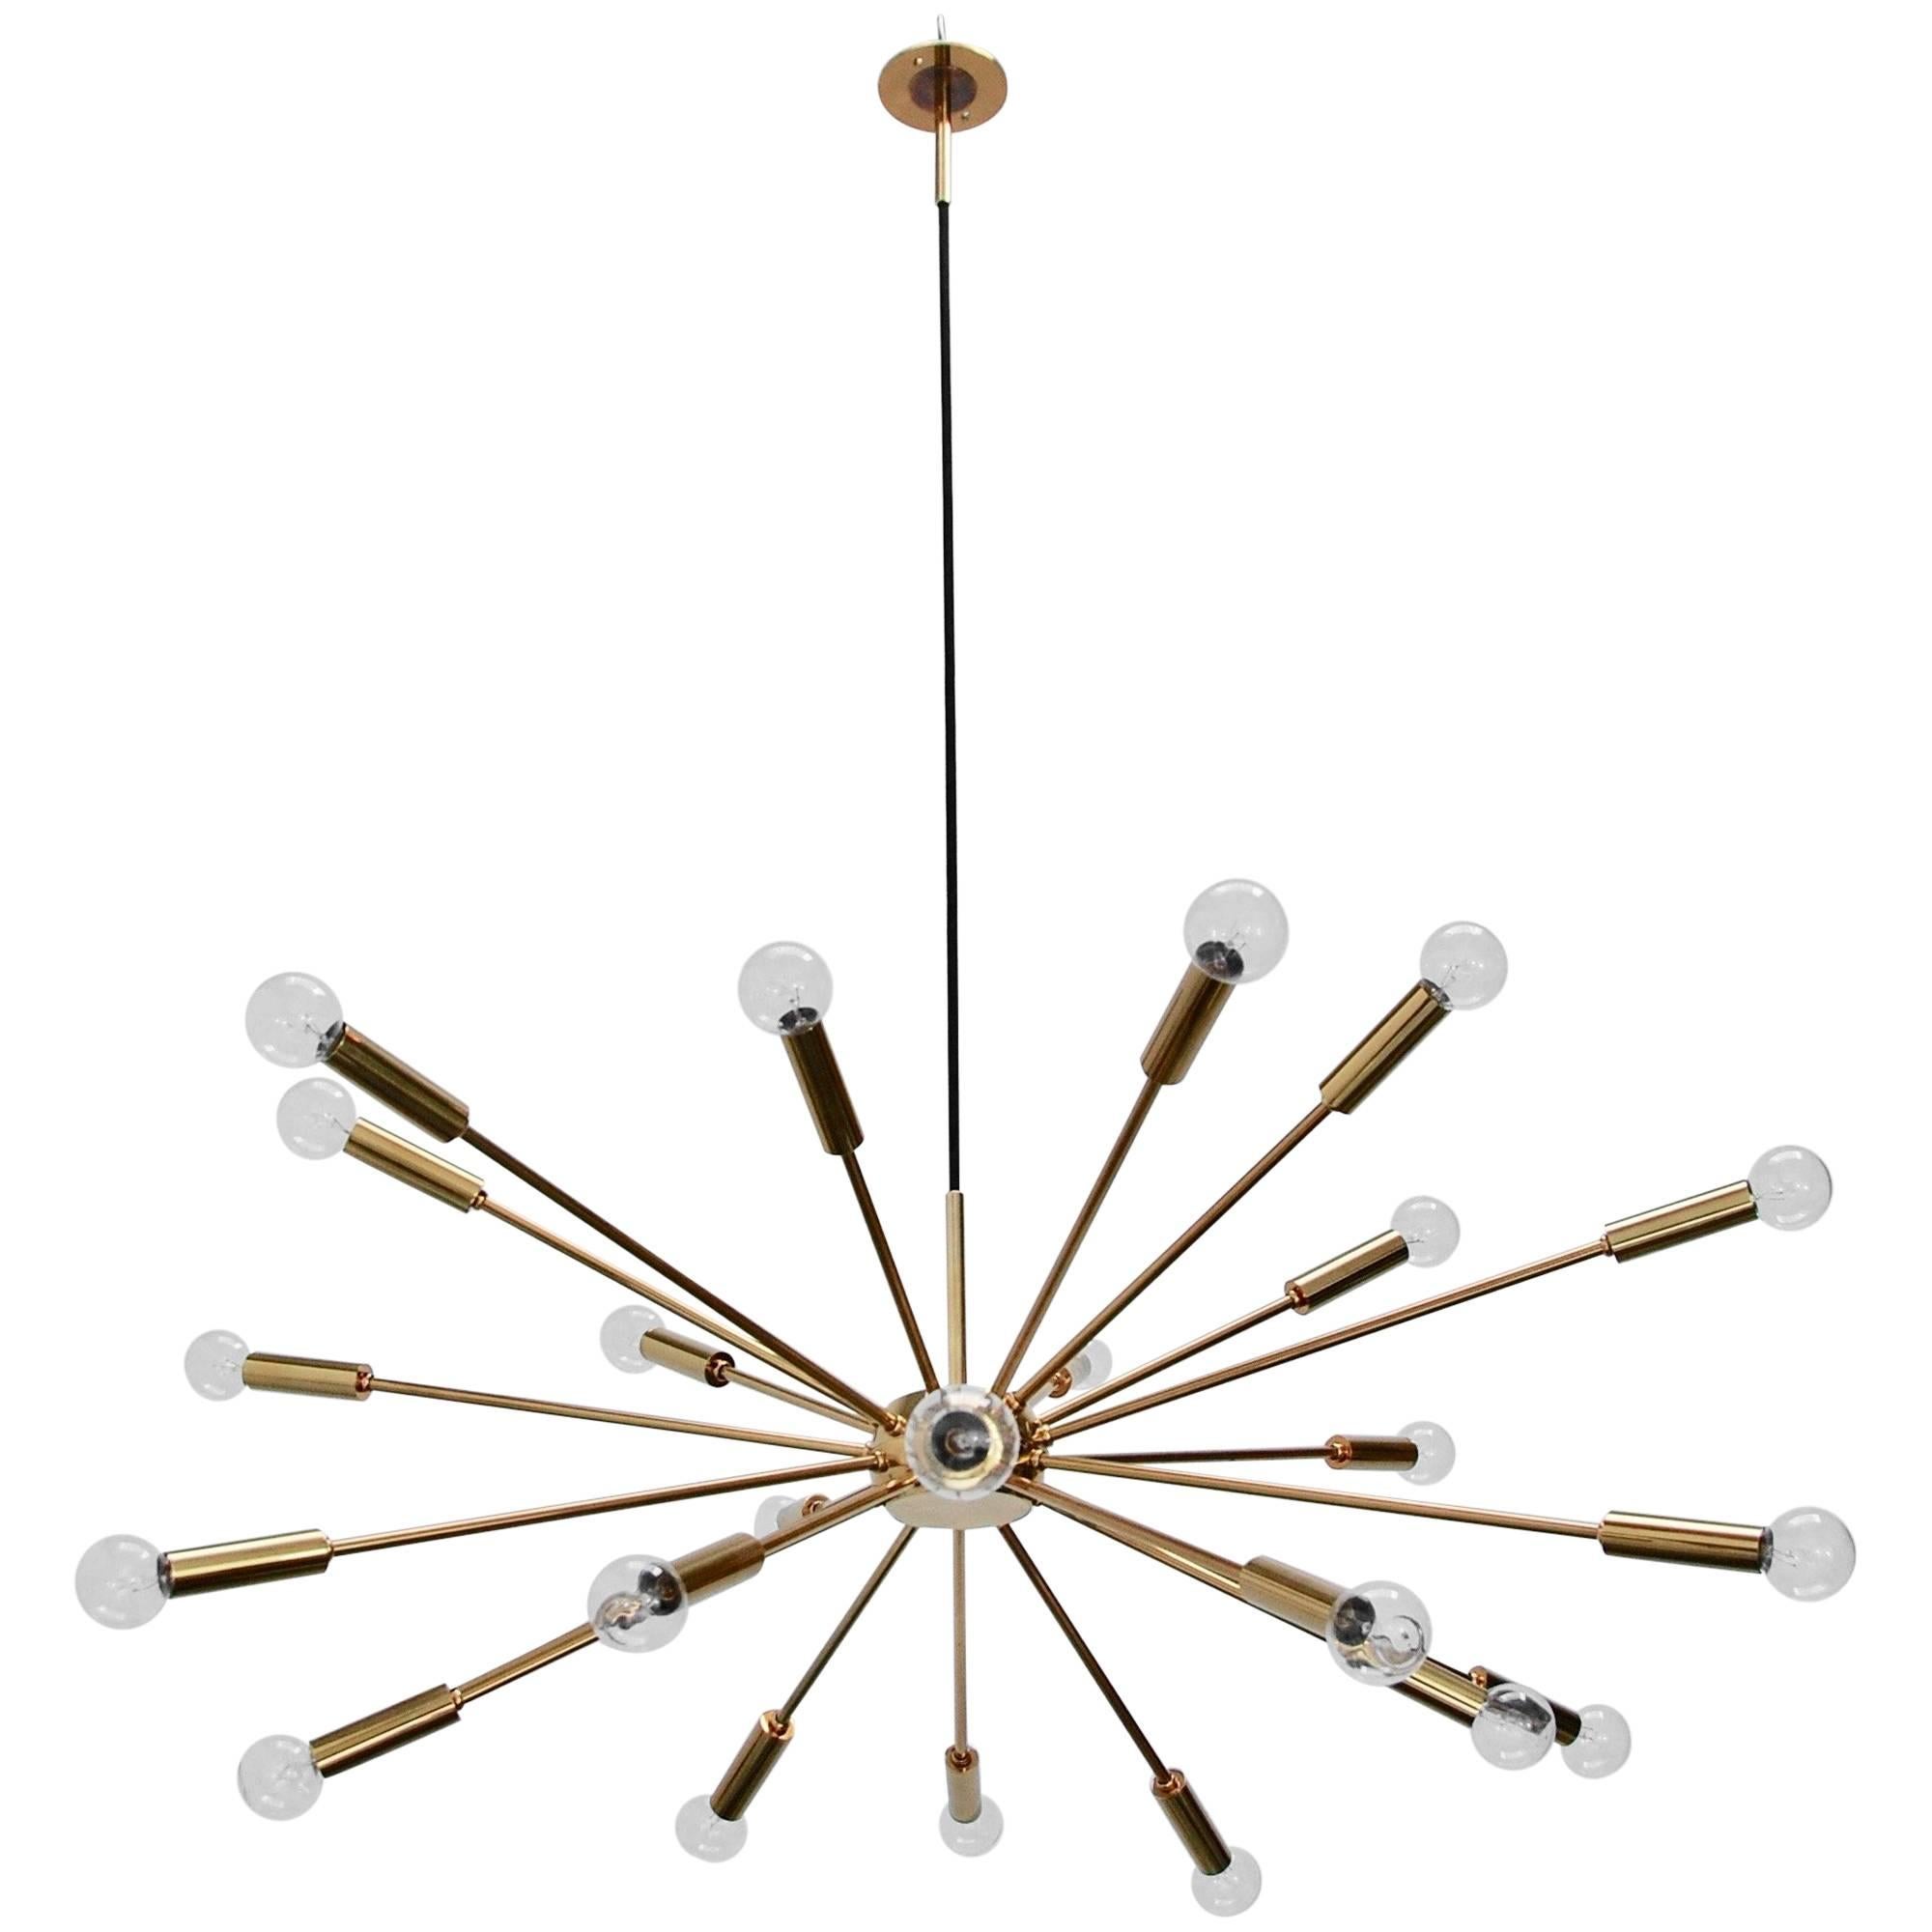 Custom patinated lacquered brass sputnik in the manner of Gino Sarfatti. 24 lights with E12 candelabra based sockets, can be wired for anywhere in the world. Custom drops and finishes available.
Measures: Overall drop 51”
Fixture height